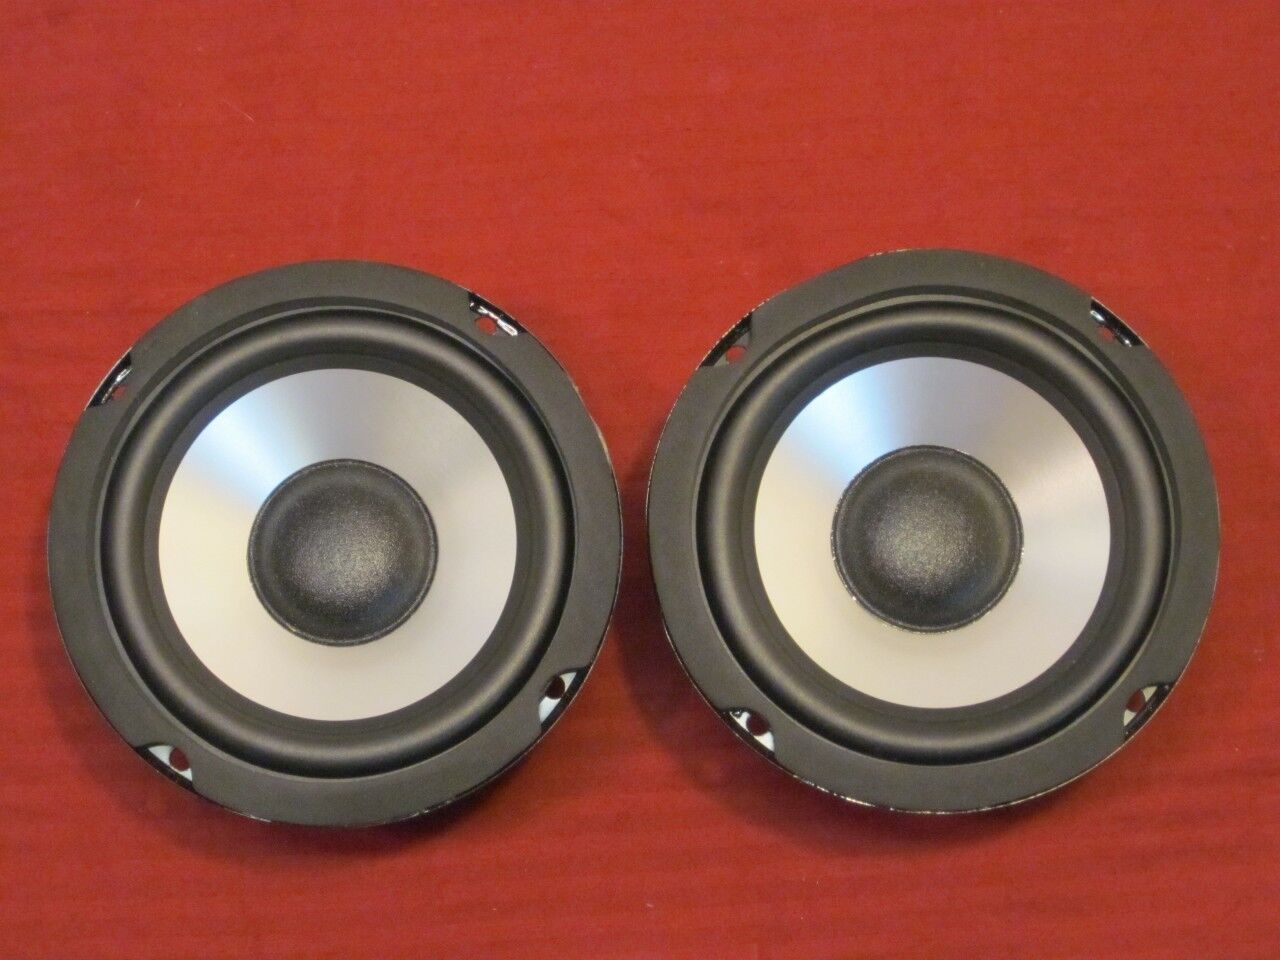 NEW (2) 5" Woofers Replacement Speakers.Home Audio.Pair.8 ohm.five inch midrange audioselect 5inch.altavoz.speakers.five inch.5in